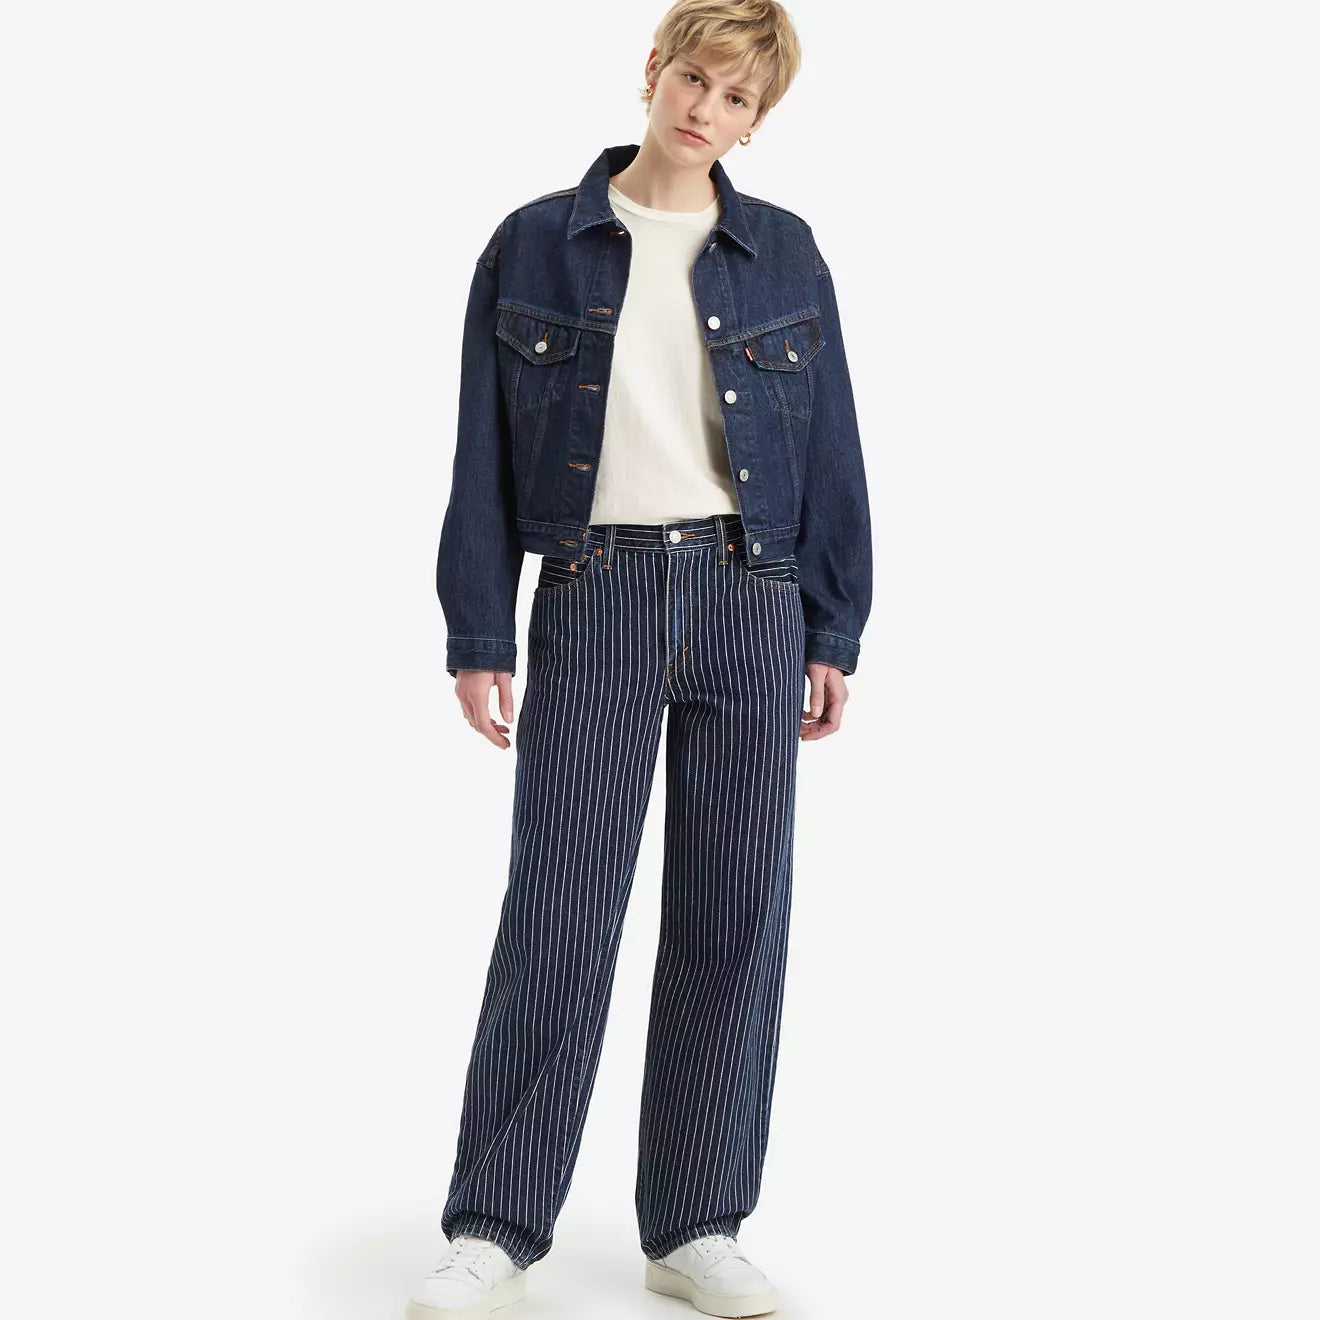 Levi's Baggy Dad Partly Masked "Pinstripe"